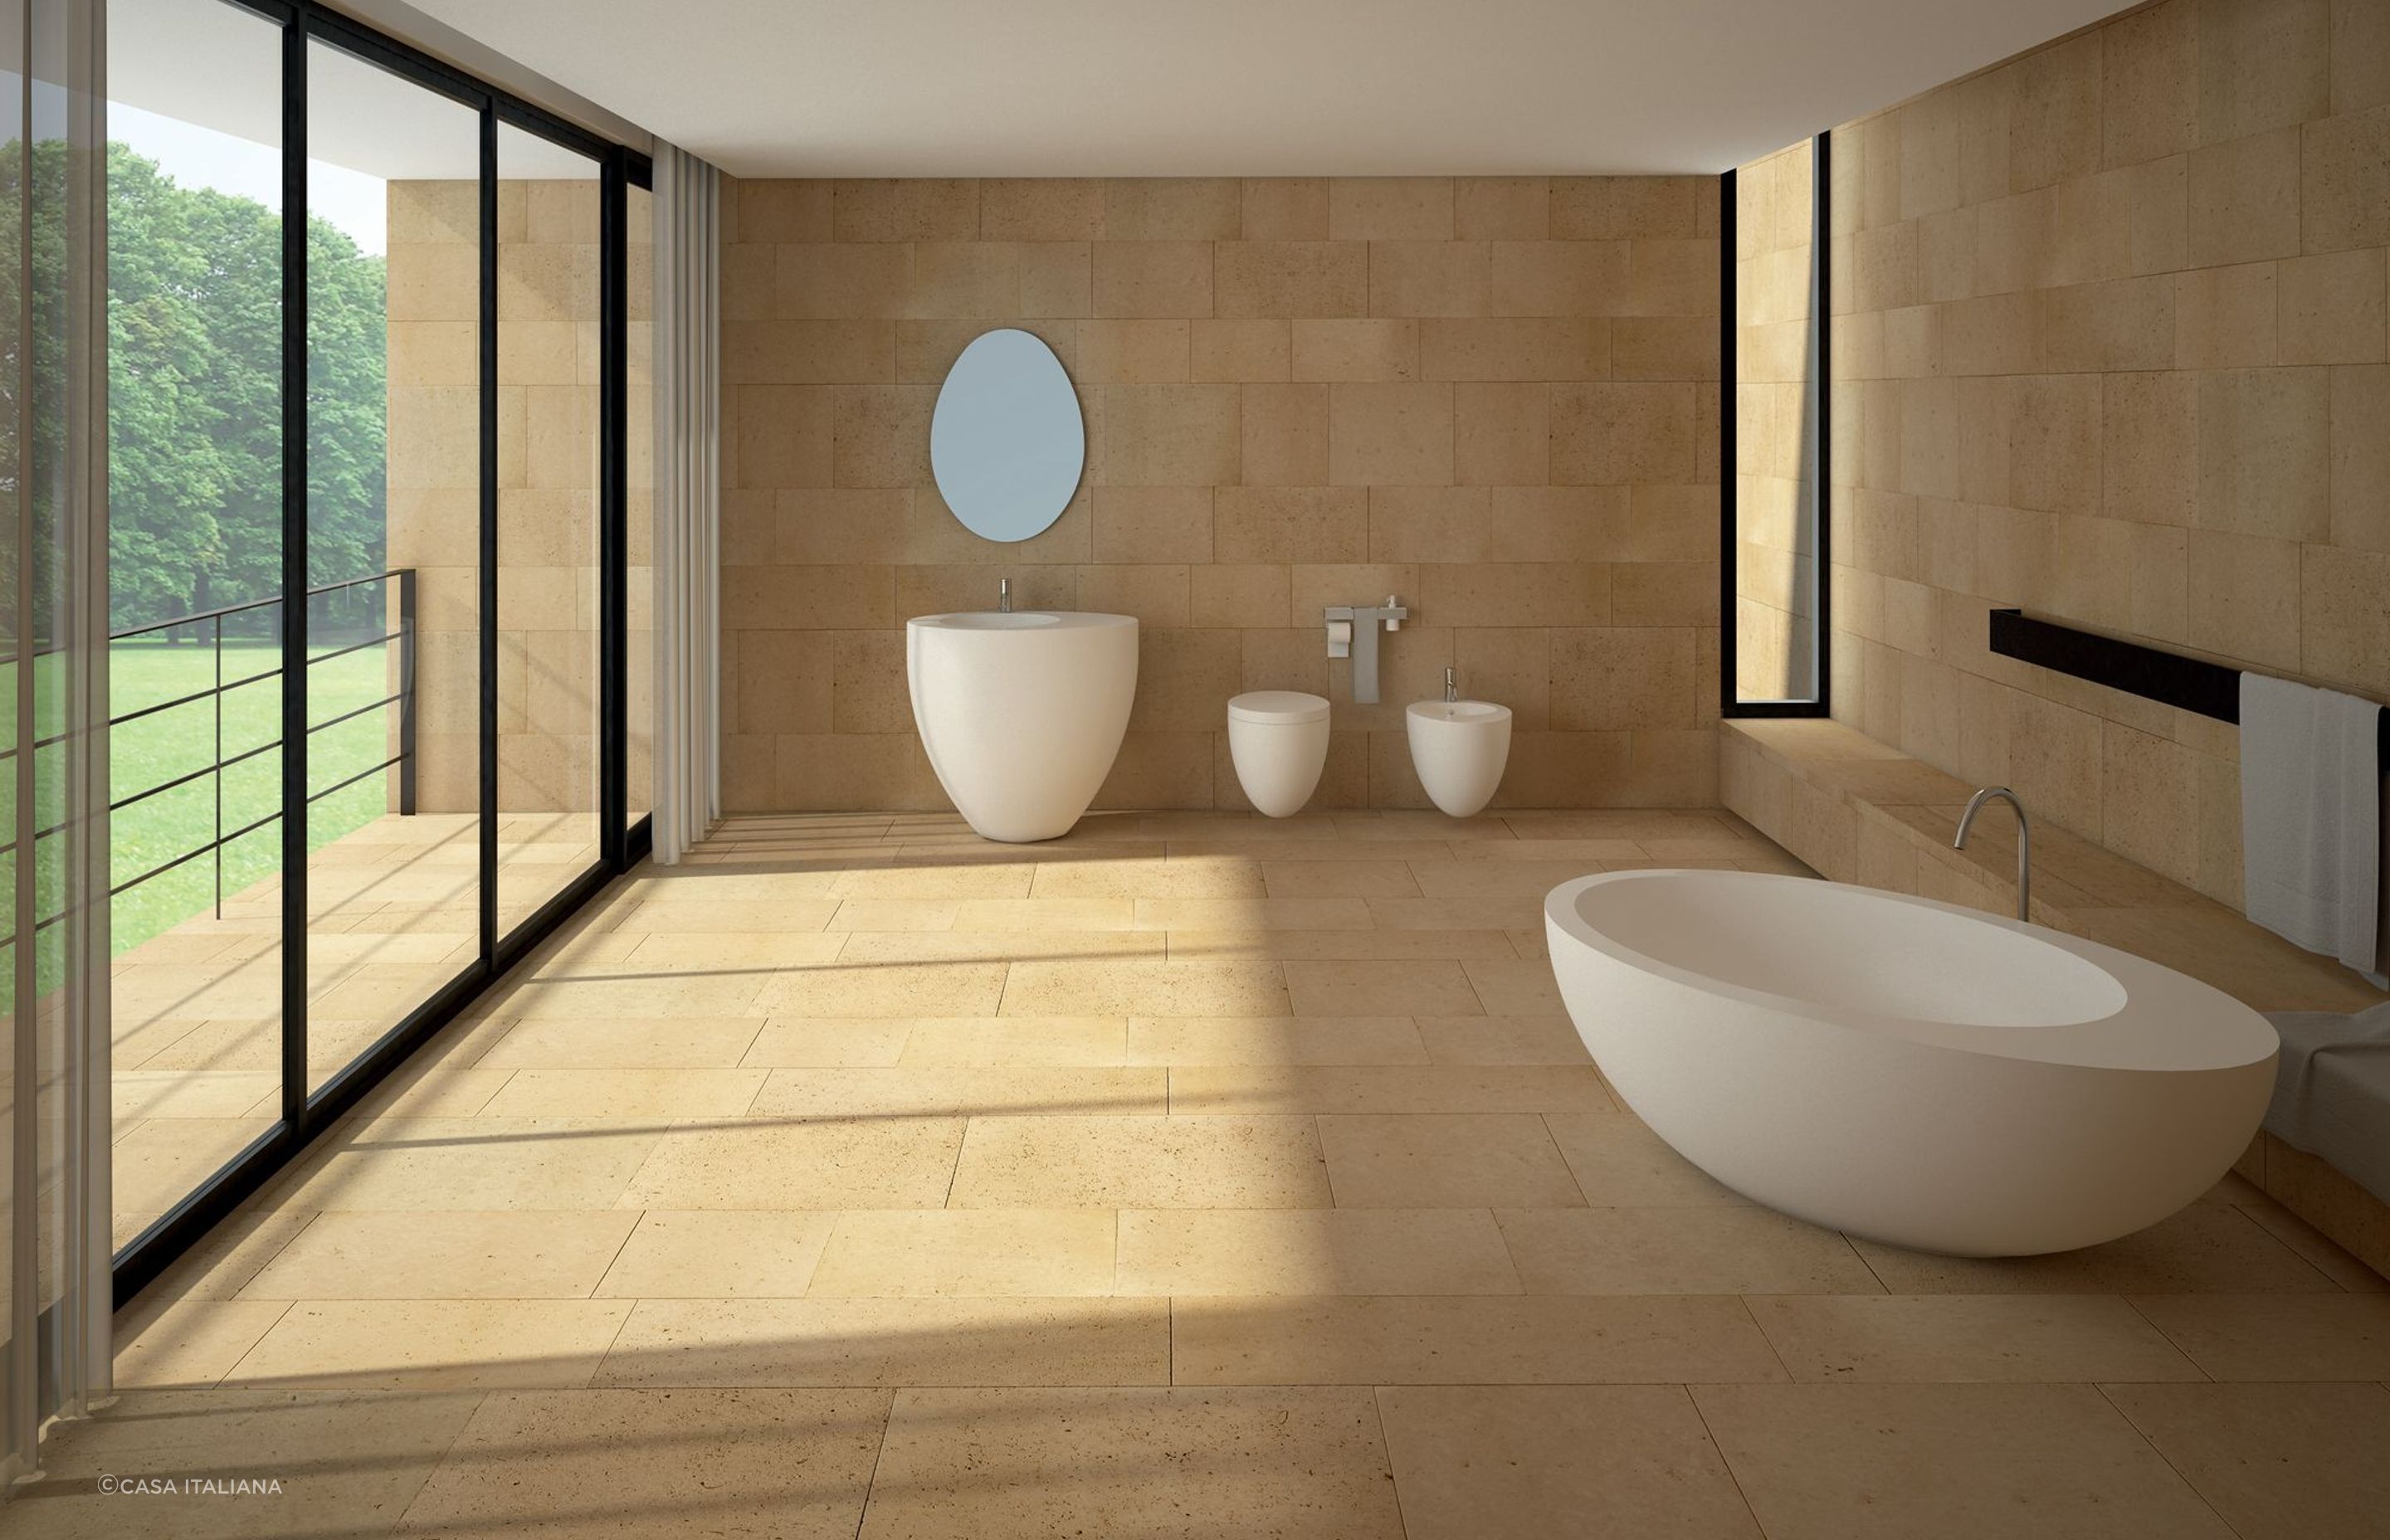 More innovative modern design with the Le Giare Wall Hung Toilet and Bidet by cielo